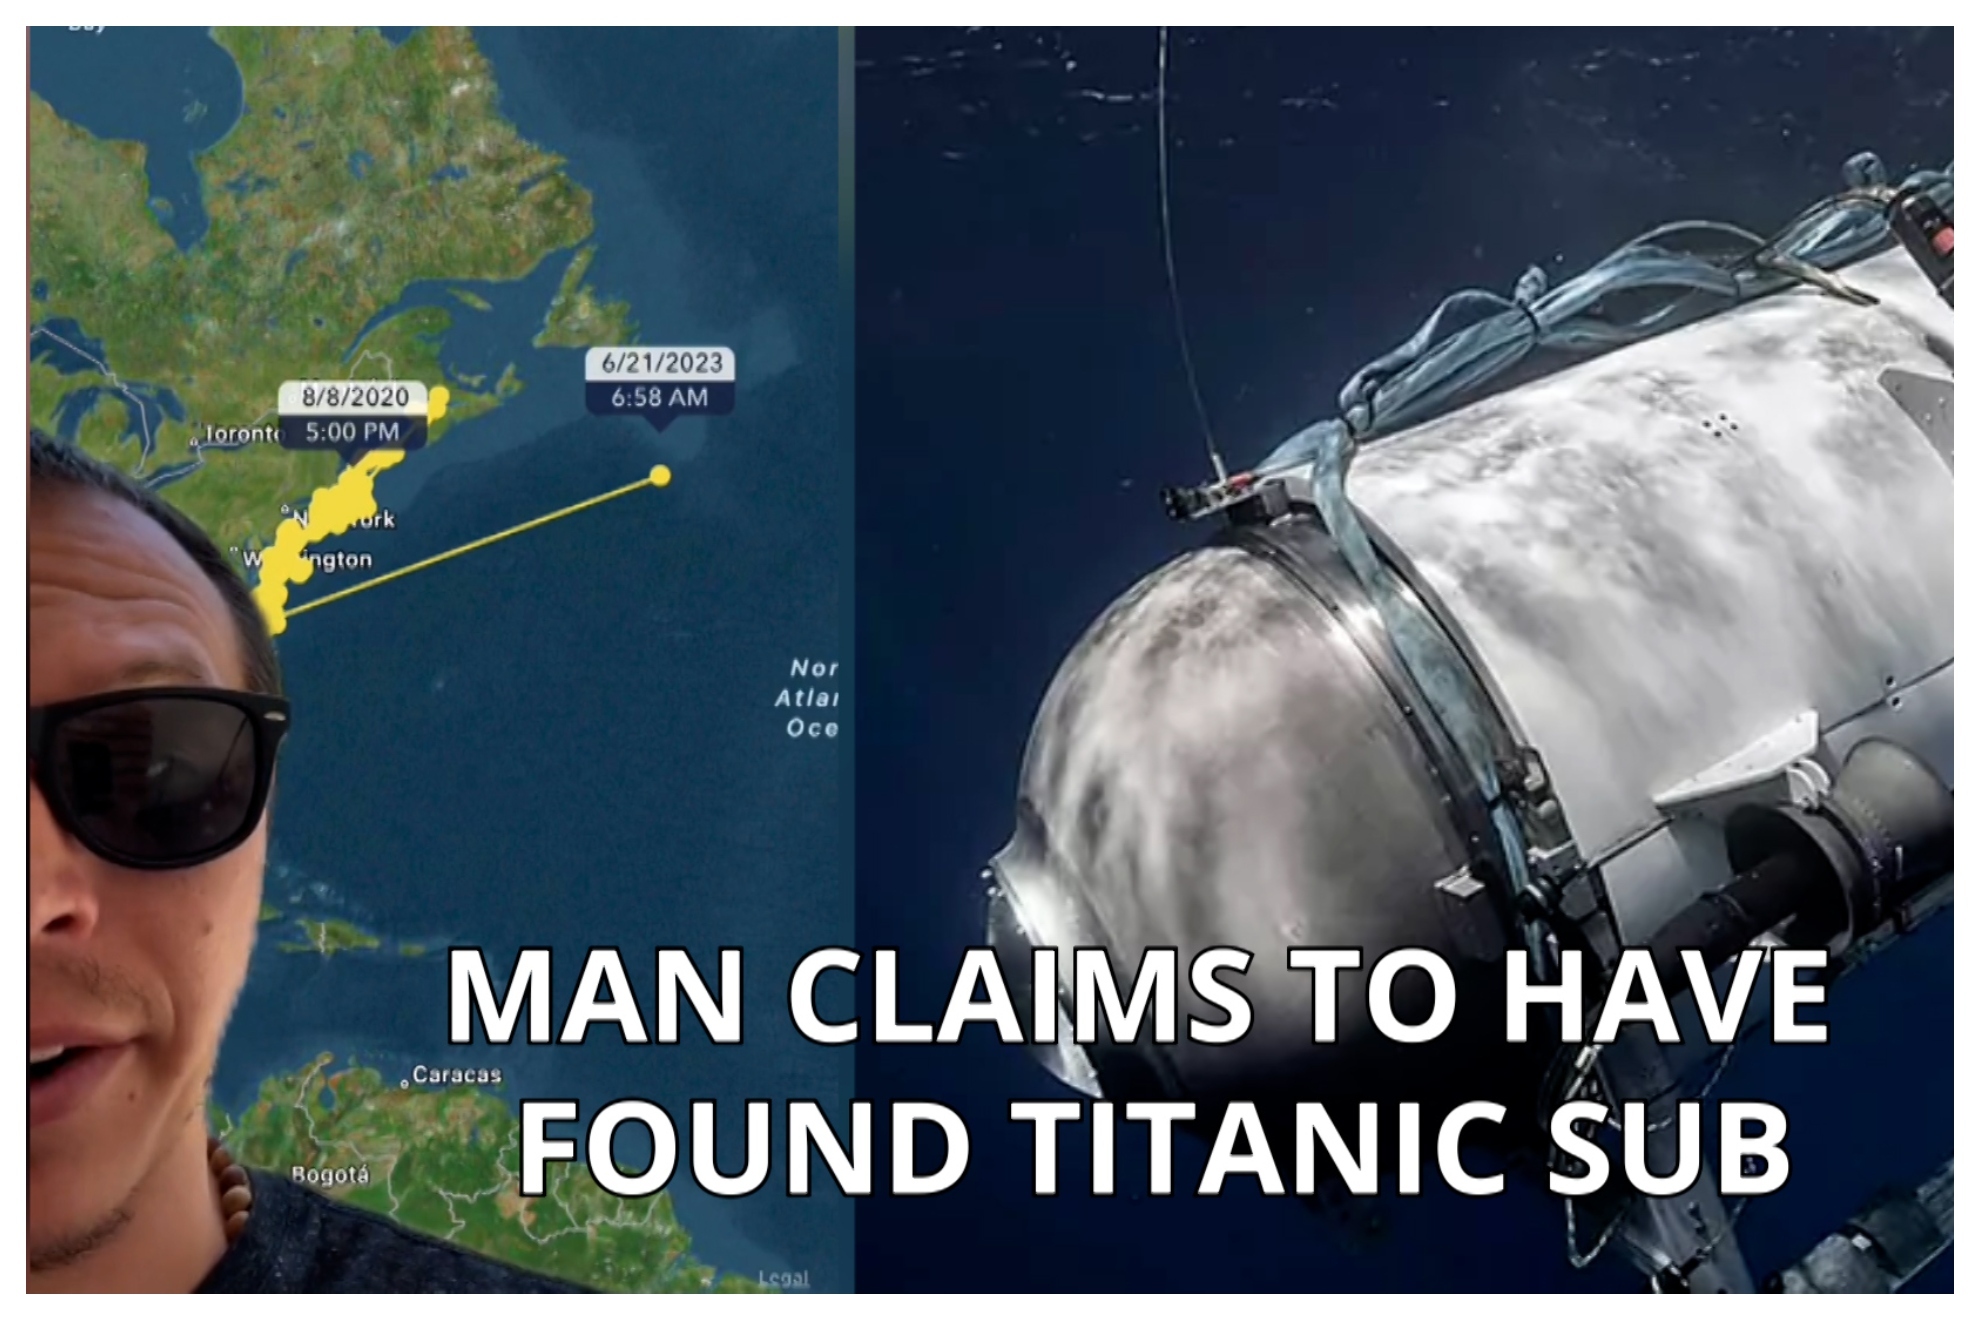 Missing Titan submarine's location 'discovered' by TikToker | Marca